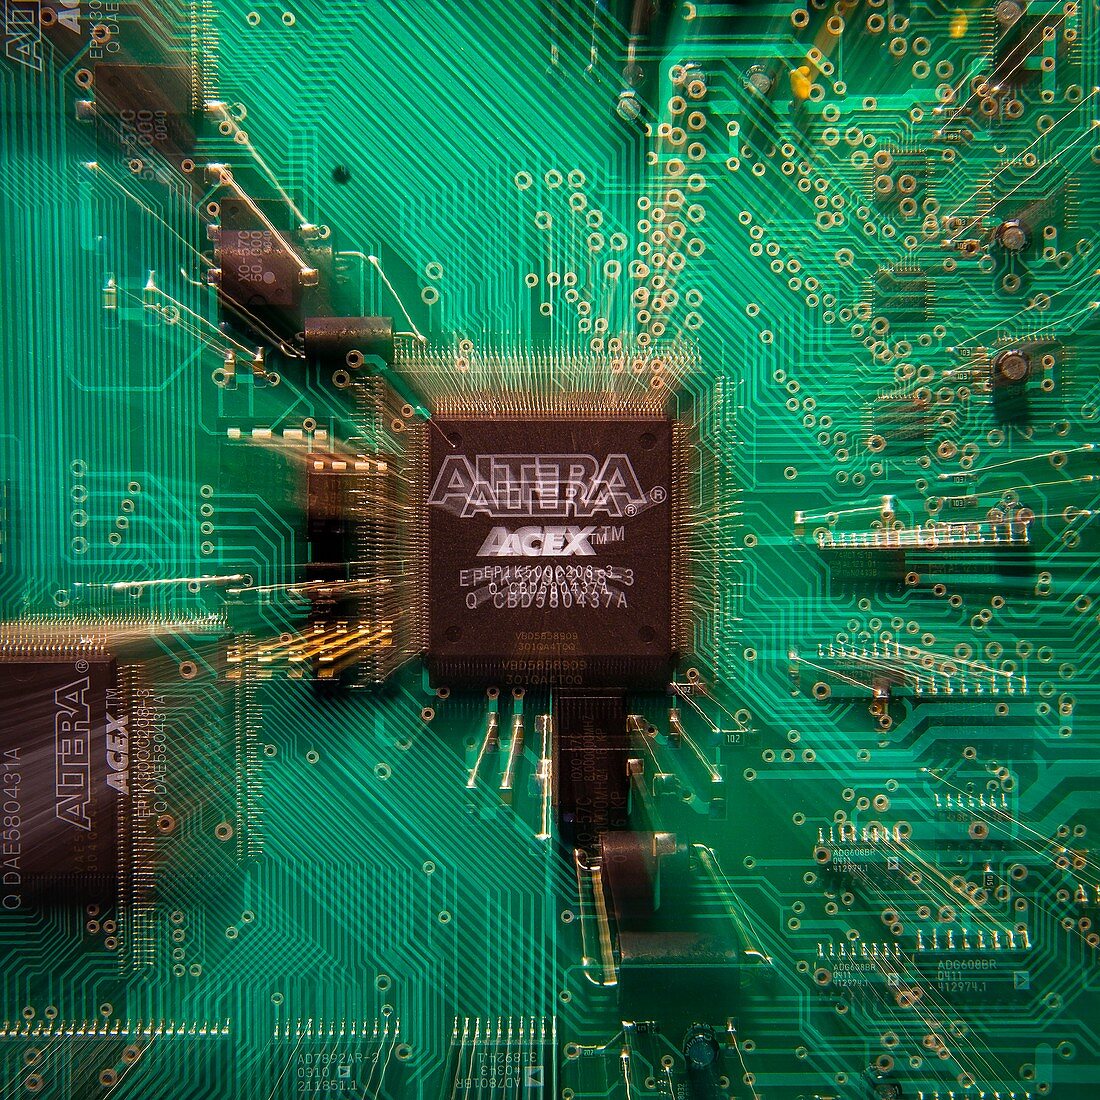 Microchip plugged into a circuit board, abstract image